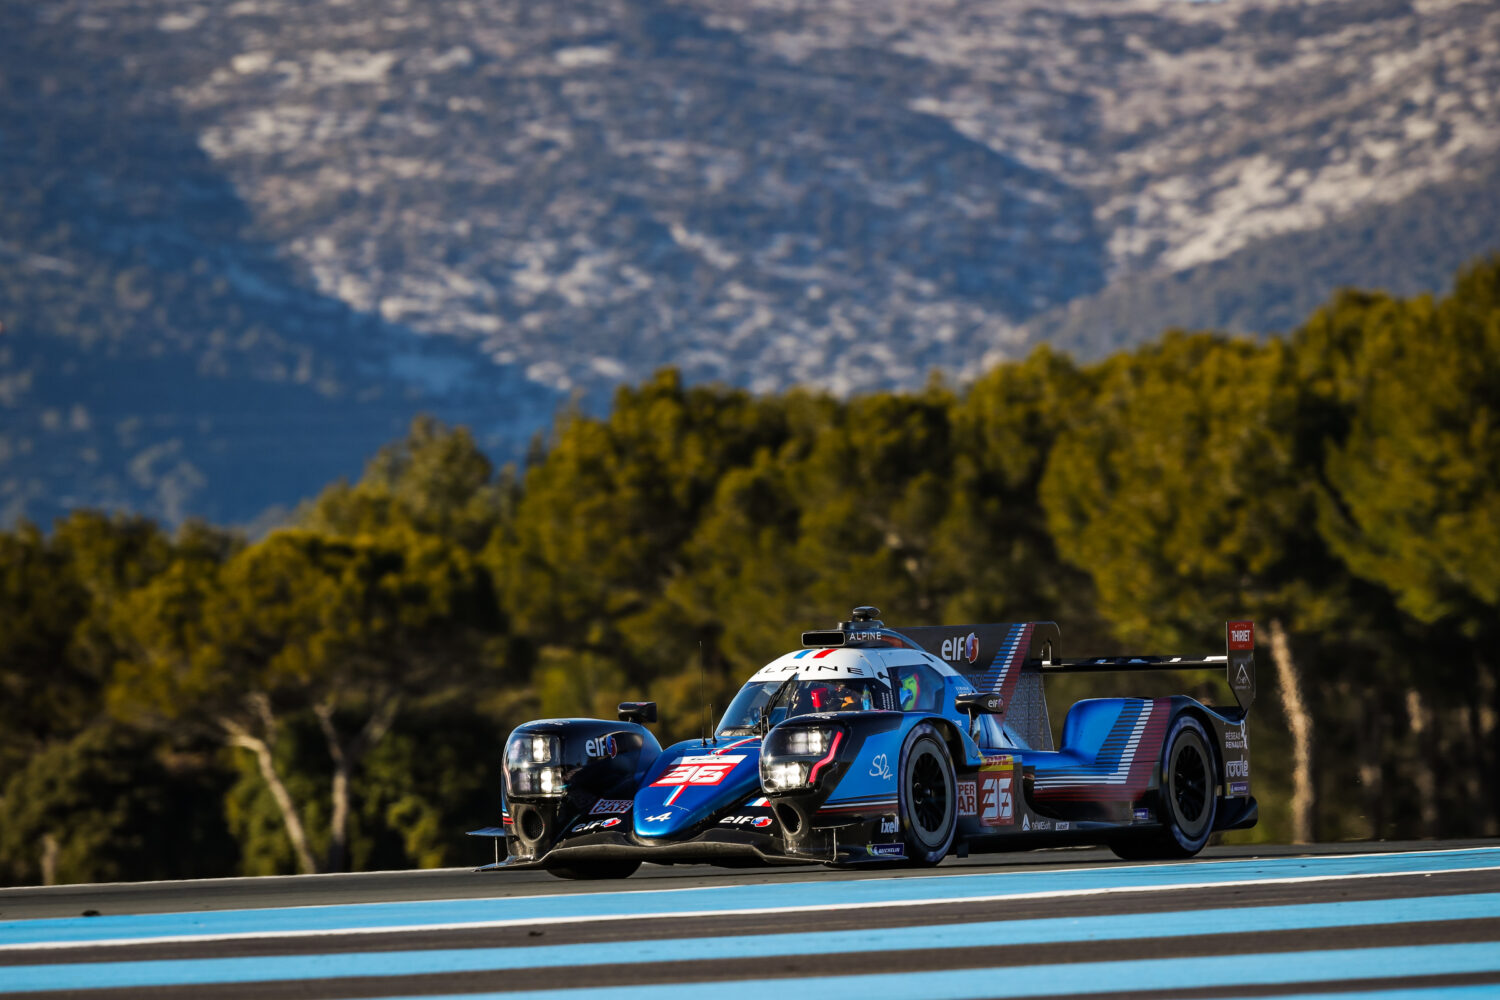 4-2022 - Alpine A480 - Tests Sessions on the Castellet circuit – Alpine A480 N°36 Alpine Elf (Lapierre - Negrao - Vaxiviere).jpeg